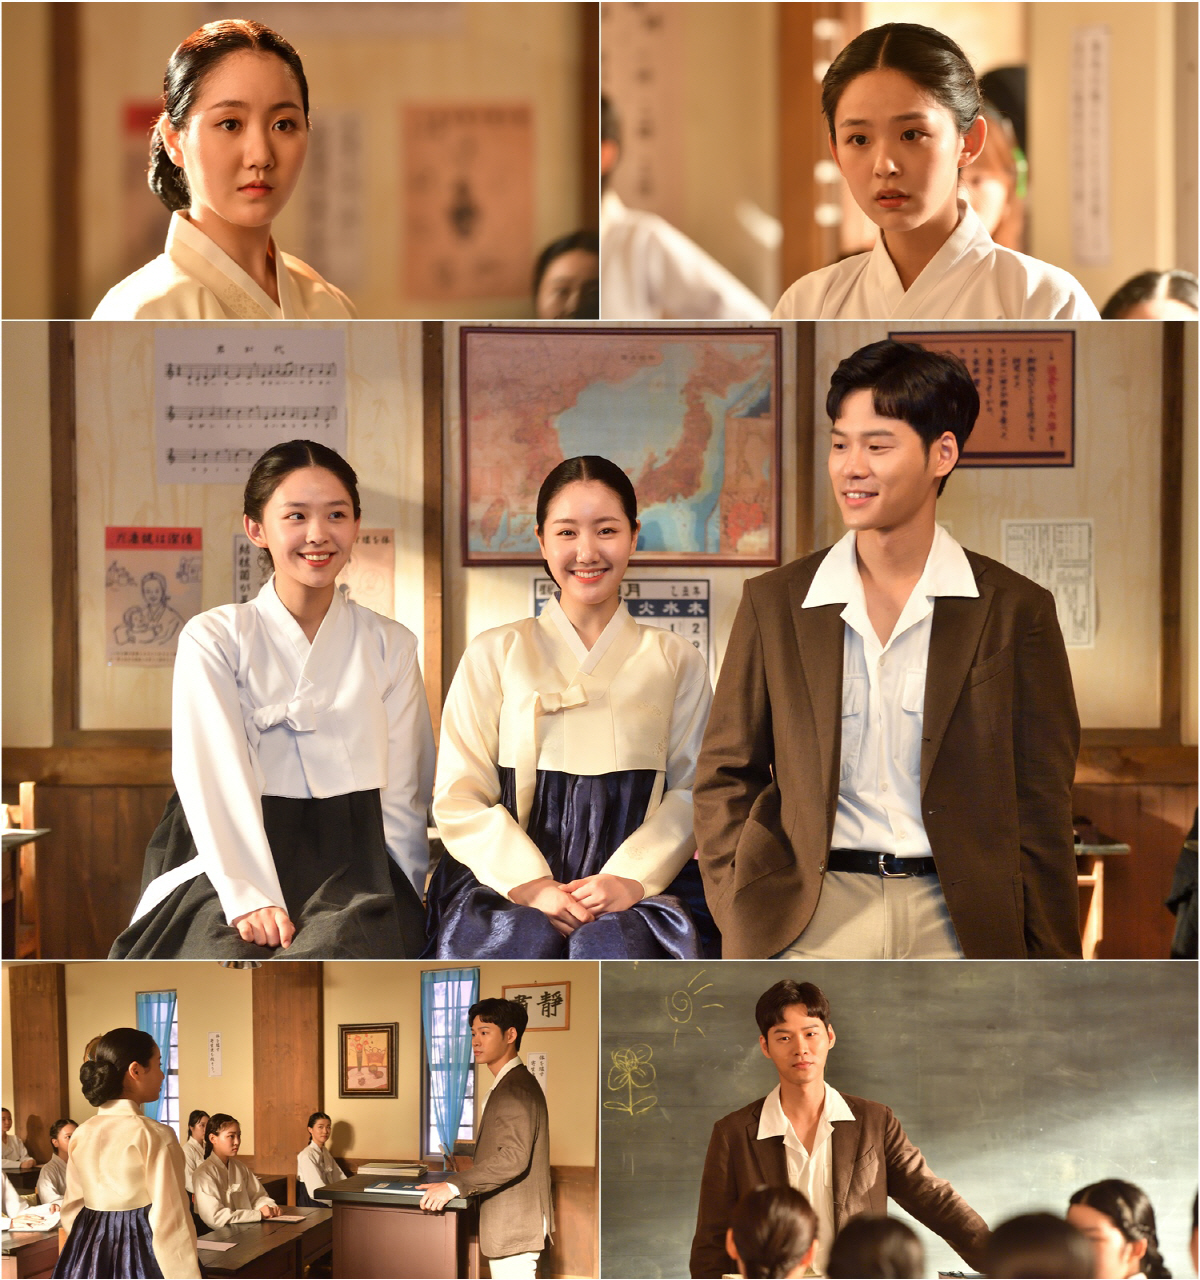 UHD KBS drama Special 2020 Modan Girl (directed by Hong Eun-mi, the play Namijin), which will be broadcasted at 10:30 pm on Saturday, November 7, is a work that depicts the growth period of women who tried to become a mother girl to turn their husbands mind in the 1930s.The still cut released today contains images of Actor Jin Ji-hee, Kim Si-eun and Yoon Ji-on as if they were entering the flowering season of the 1930s.The story of the era created by the growing actors who will lead the drama version of the Republic of Korea in the future feels more special.Shin Deuk (Jin Ji-hee), who was married to a pro-Japanese sign family at a young age, decided to go to school to regain his windy Western man as the best modern girl of this era.Next to such a god-like god-like thing is Young-i (Kim Si-eun), a somatoma and only companion, and Woojin (Yoon Ji-on), a teacher who makes the hearts of two girls beat.This is why three people with different identities in the public still cut are in a common space called school.The pure and wrong newfoundness that does not know where to go is going to fall into a real love when he sees Woojin, but the problem is that Young will also have a coalition for such WoojinThe difference in identity is the first time that a crack occurs between two girls who considered each other a soul mate. Then, I wonder where Woojins friendly eyes will be headed.It is also a point to pay attention to the process of growing up to experience a series of situations that have not been experienced and to become the subject of me, that is, to find the real meaning of Modan Girl.Its not the end here.The scene behind-cut is expected to be the new Kim Si-eun and Yoon Ji-ons Acting Chemie, who have definitely taken a snow stamp on viewers, including Jin Ji-hee, who is showing solid acting power for each work.All three Actors were constantly worried about the background of the times and the character, and they were thoroughly prepared and appeared on the scene, and they poured tremendous energy.The production team said, We will draw friendship, romance and growth that Shin, Young and Woojin are splashing.I would like you to watch the process of loving and growing in Modan Girl by three men and women with different environments, personality and story. He said, Please look forward to the limited-class chemistry of Shindeuk, Young Lee and Woojin Modan Girl will be broadcast on KBS 2TV at 10:30 pm on Saturday 7th.Prior to the first broadcast, an online meeting attended by Jin Ji-hee and Kim Si-eun will be held on KBS SNS channel on Friday, June 6, and Jin Ji-hee will appear on KBS Cool FM (89.1MHz) I am Lee Geum-hee on a good day to love at 6 pm on the evening.